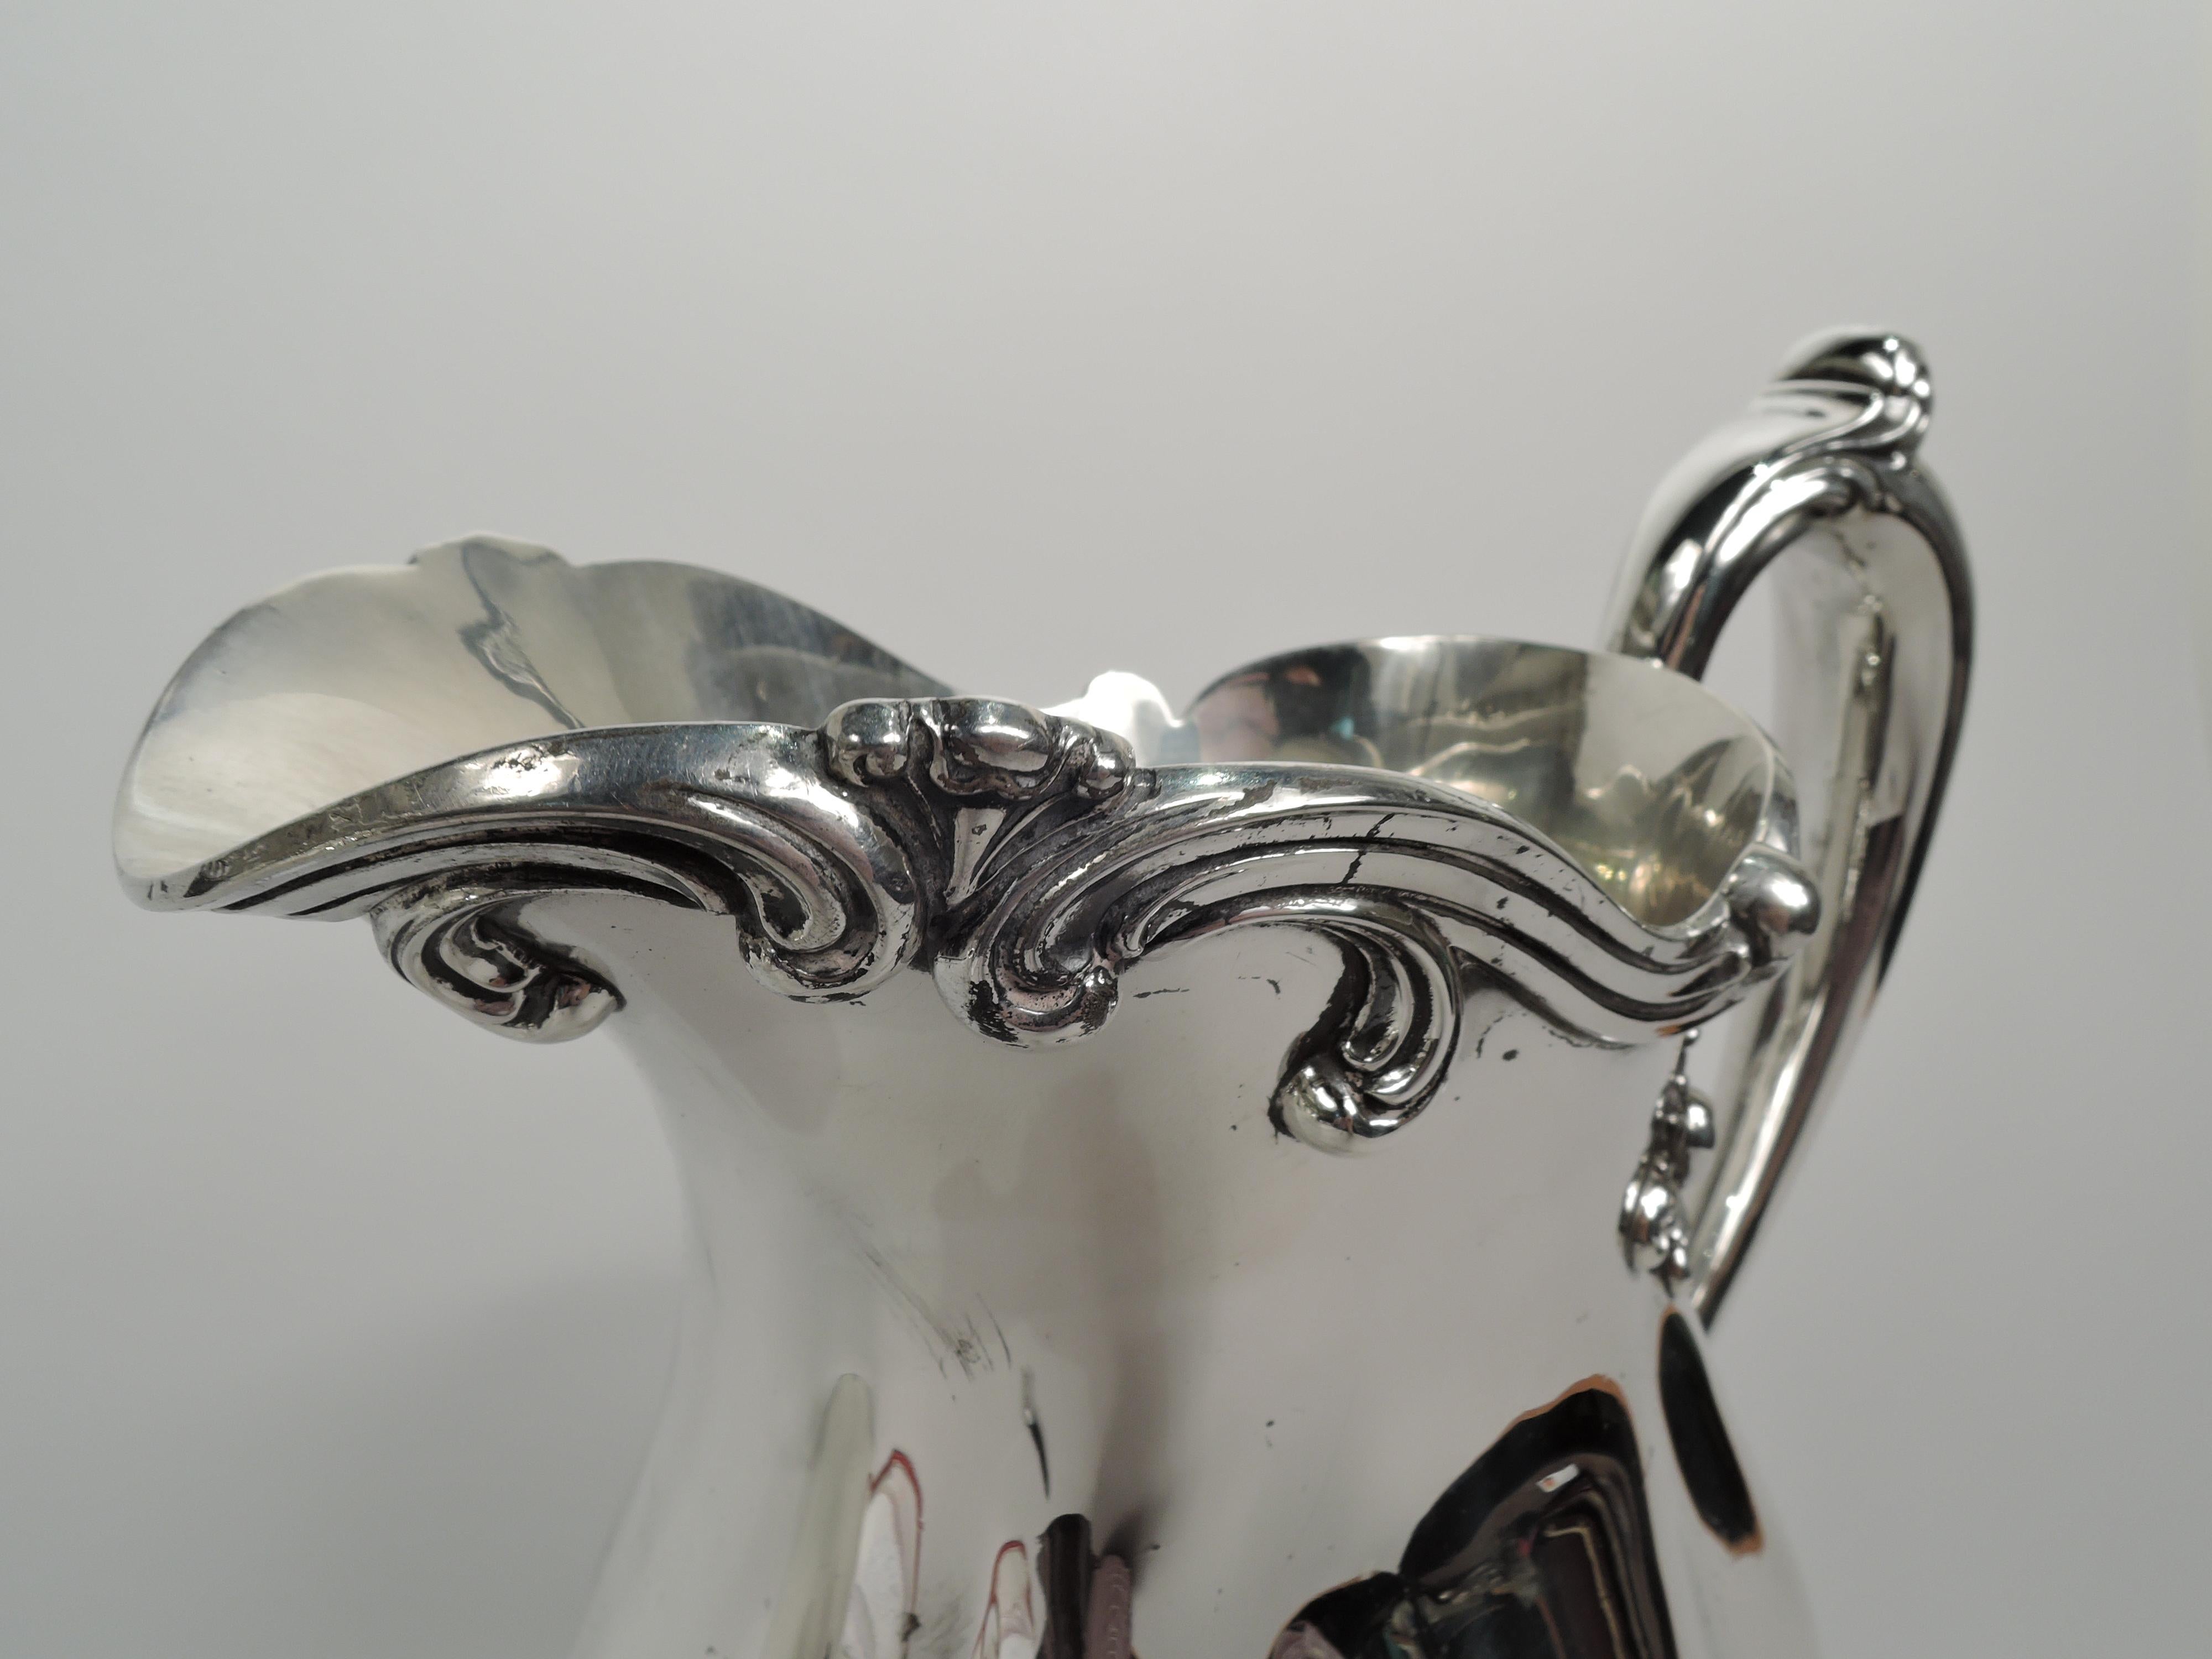 Edwardian sterling silver water pitcher. Made by Frank M. Whiting Co. in North Attleboro, Mass., ca 1910. Lobed and oval body on short and scalloped foot. Capped and scroll-mounted high-looping handle. Scrolled helmet mouth with applied rim. Pretty